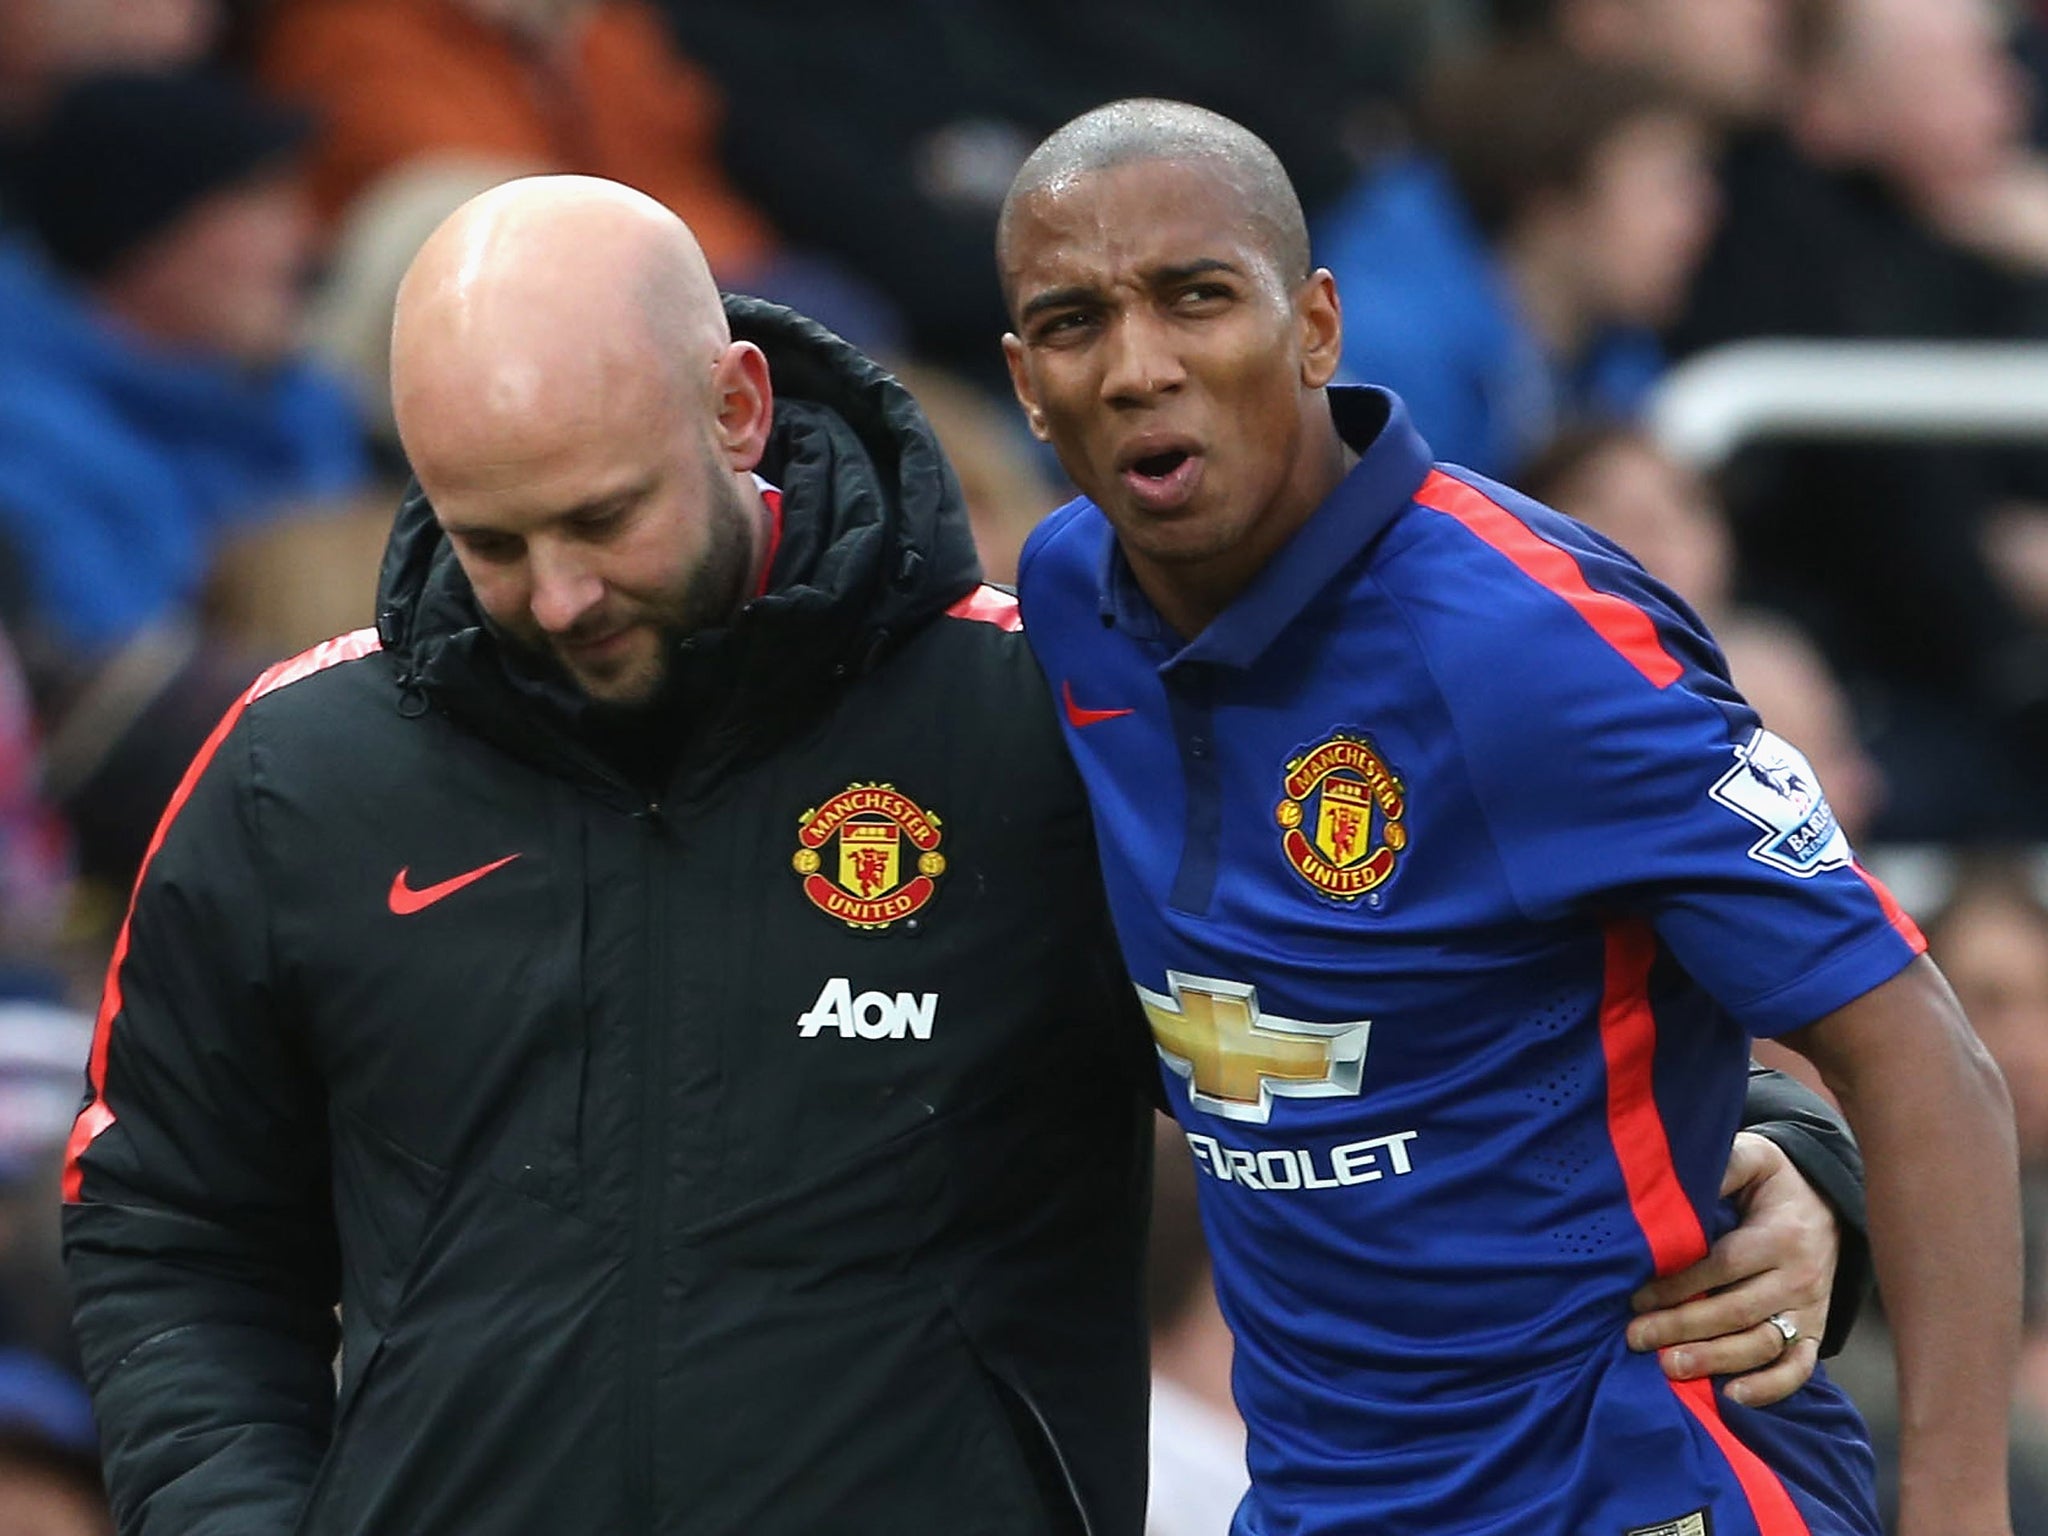 Ashley Young comes off injured against Stoke